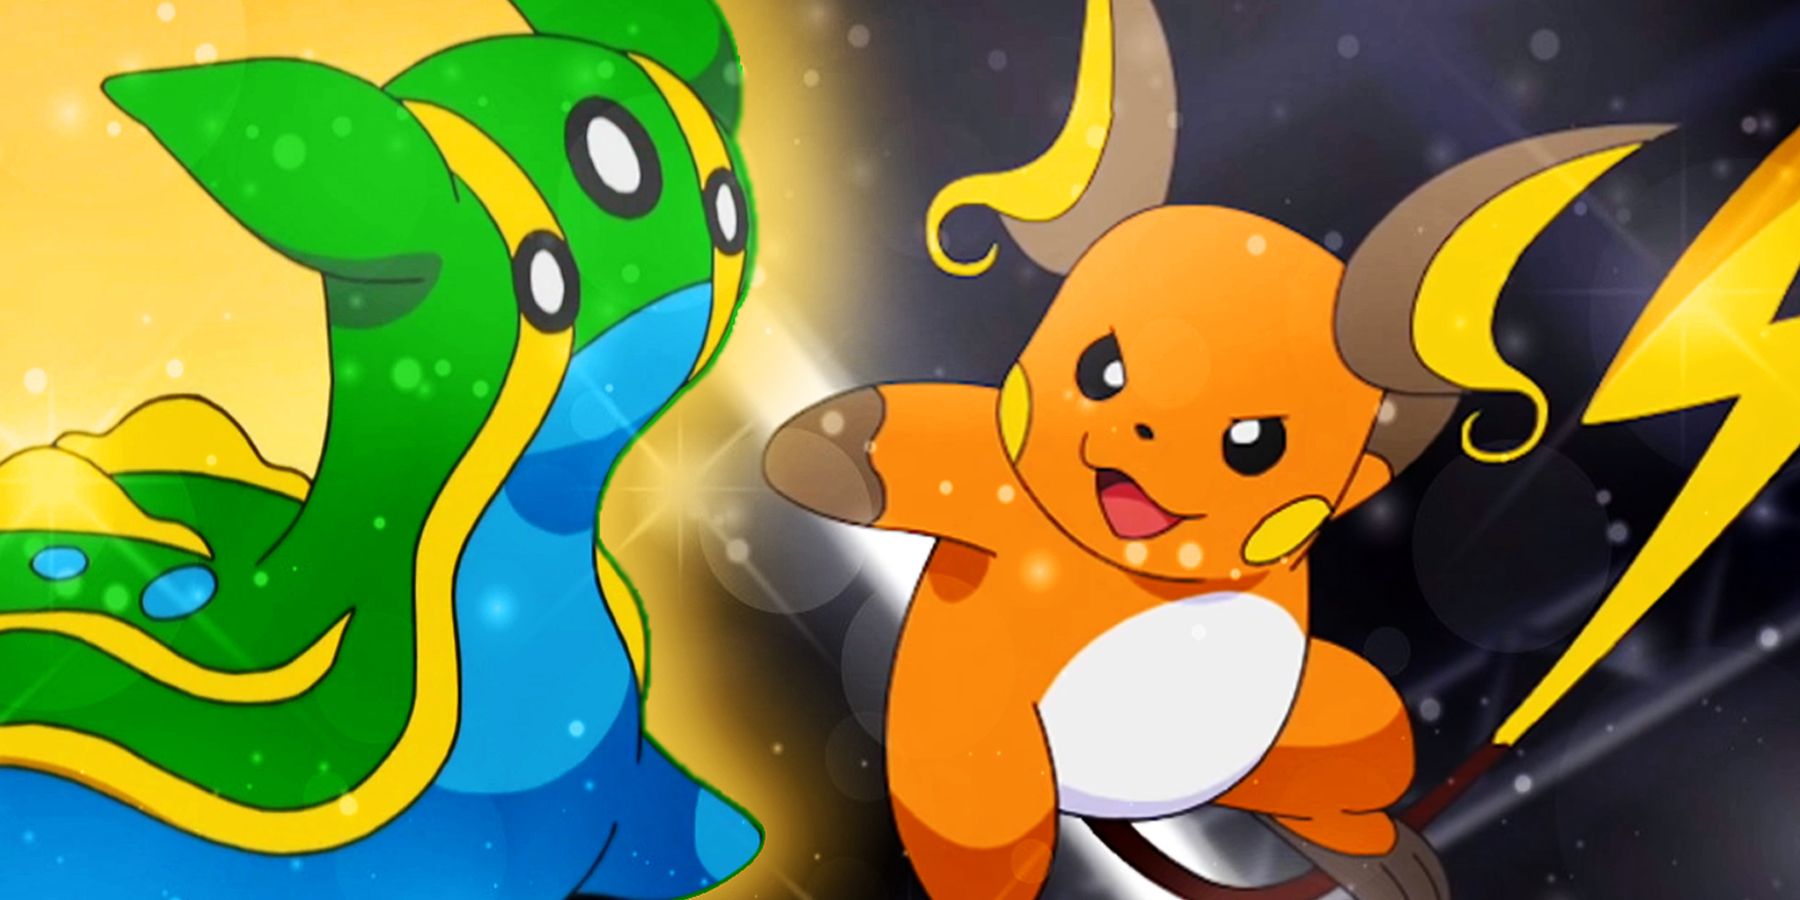 15 Well-Rounded Pokémon That Can Fit On Any Team